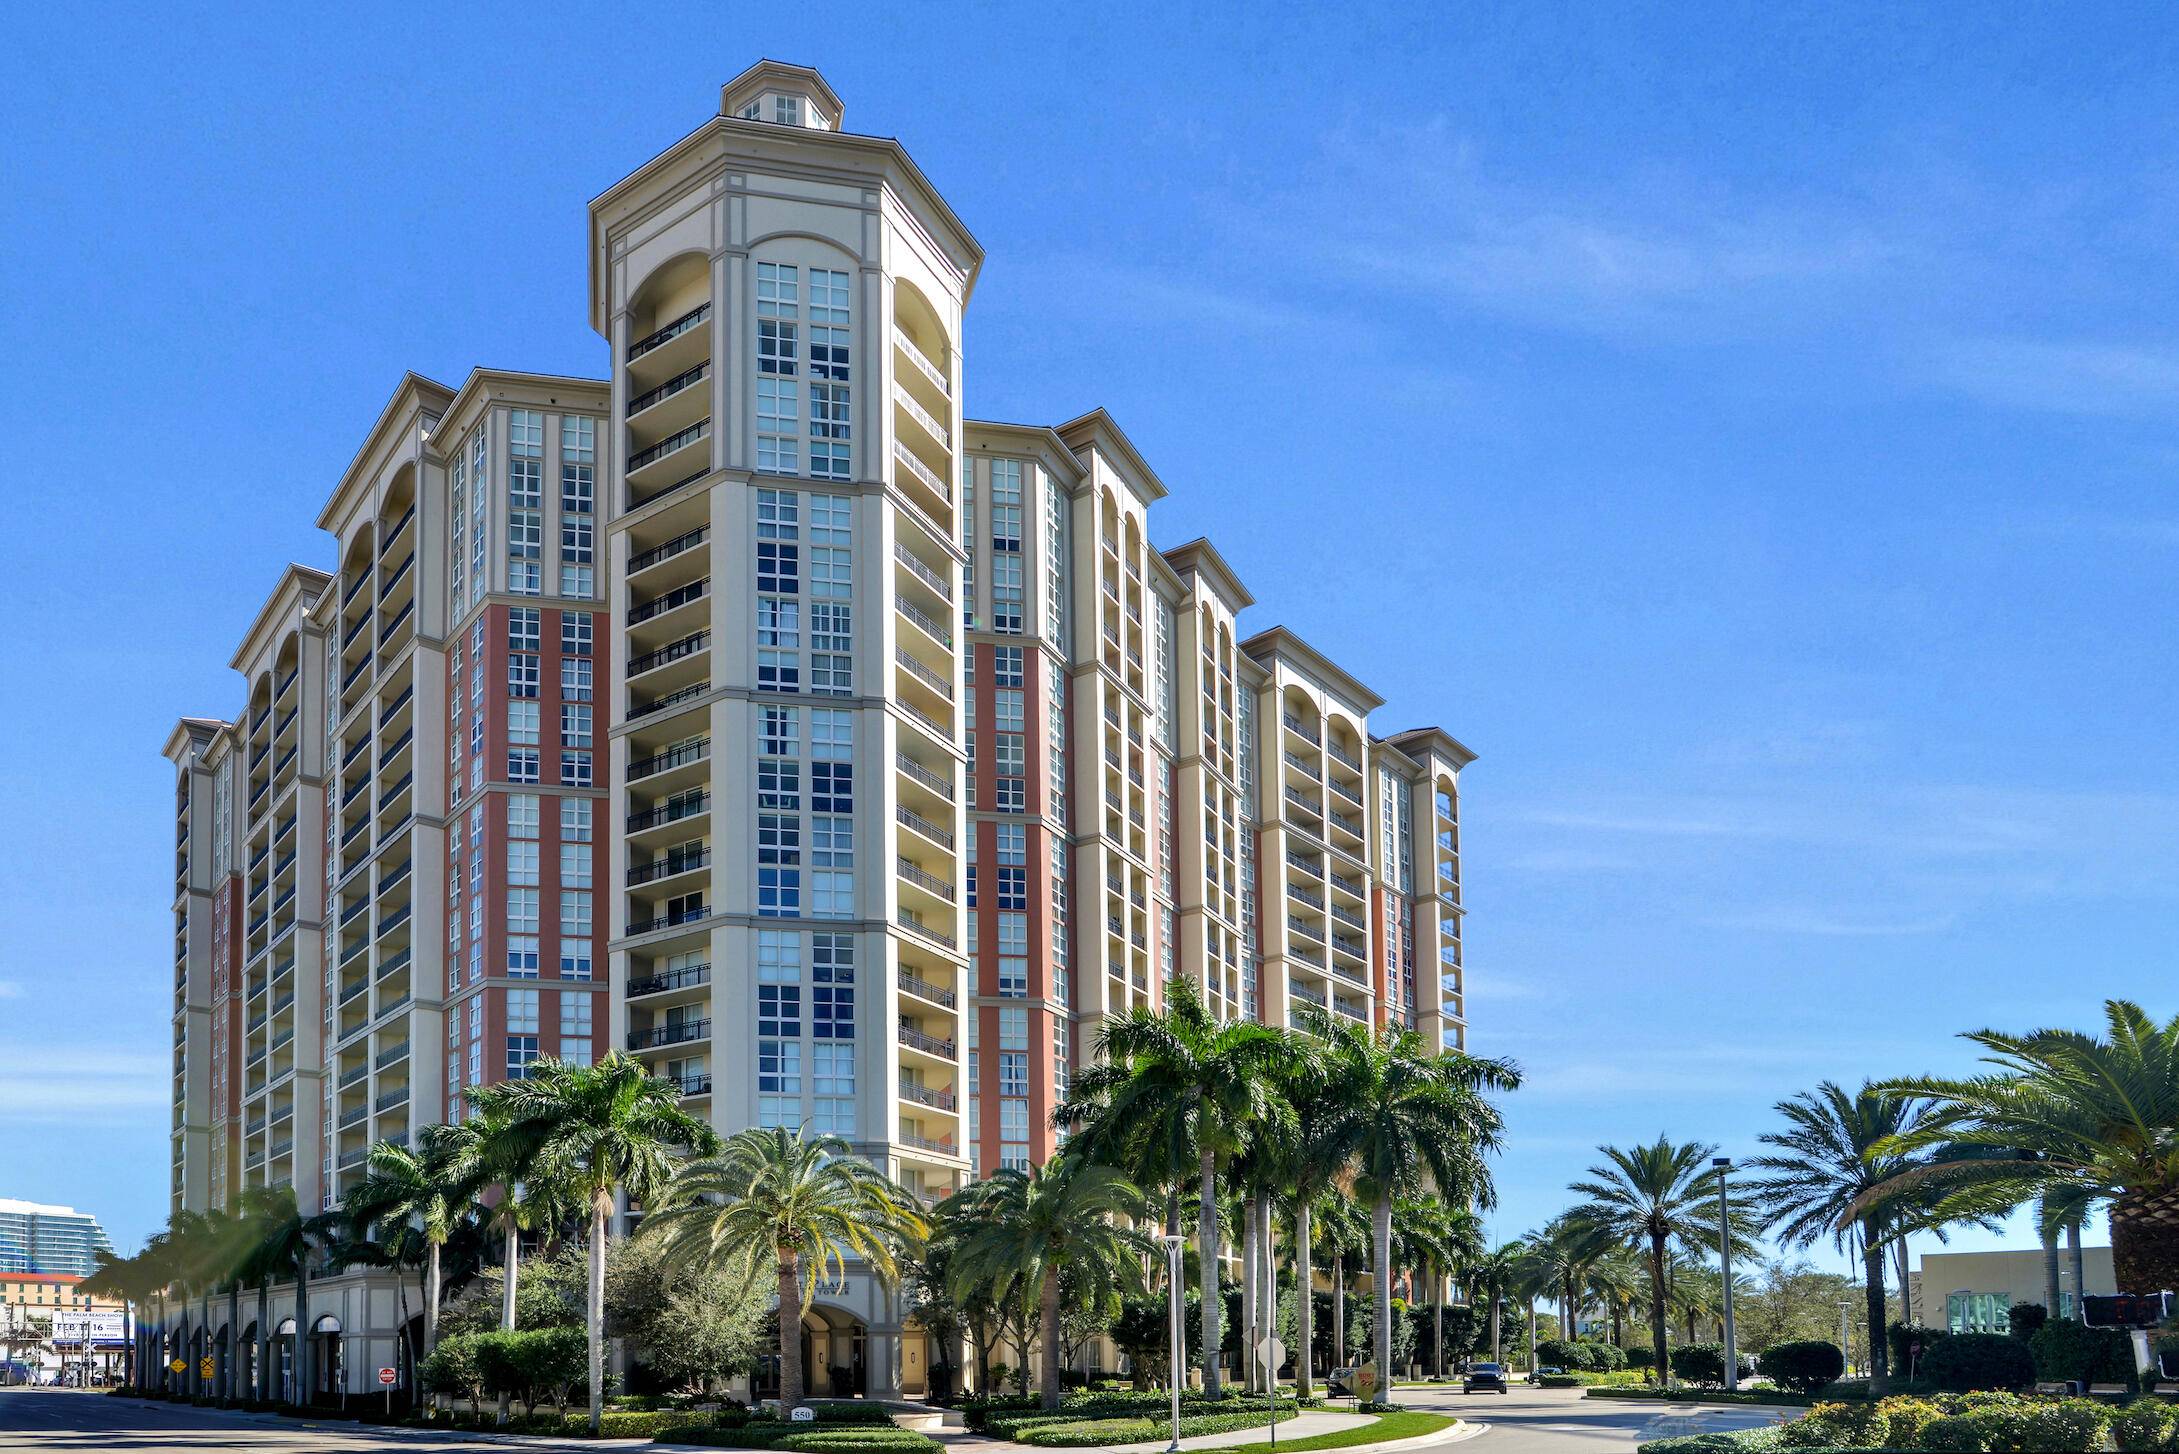 Location ! Location ! Welcome to Cityplace South Tower Condo located in the heart of downtown West Palm beach.